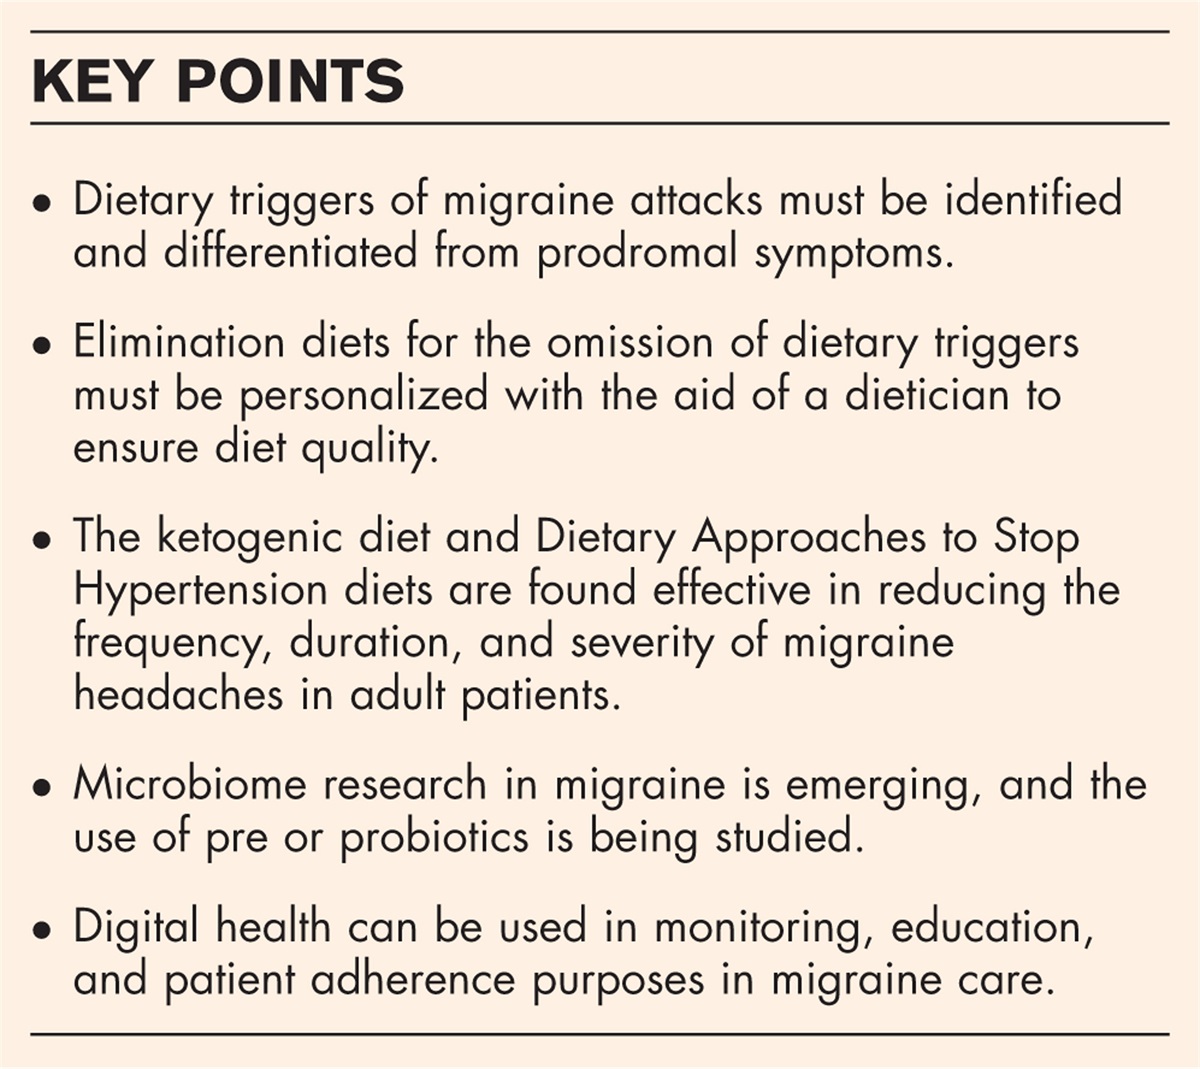 Diet and migraine: what is proven?